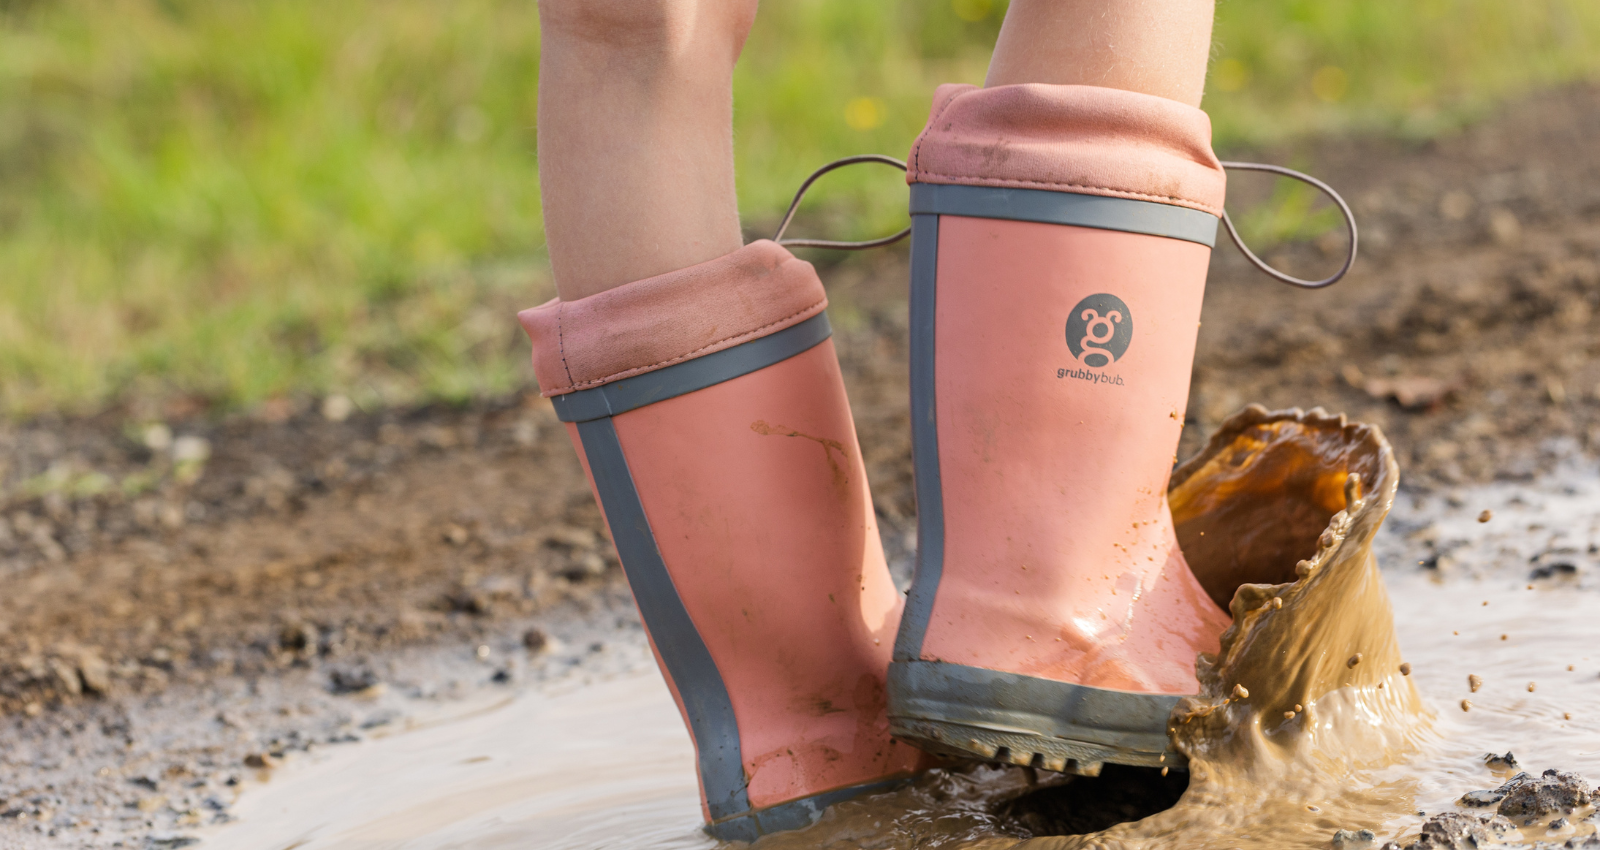 A shot of kids legs, wearing just peachy pink gumboots with an adjustable toggle top, splashing in a muddy puddle